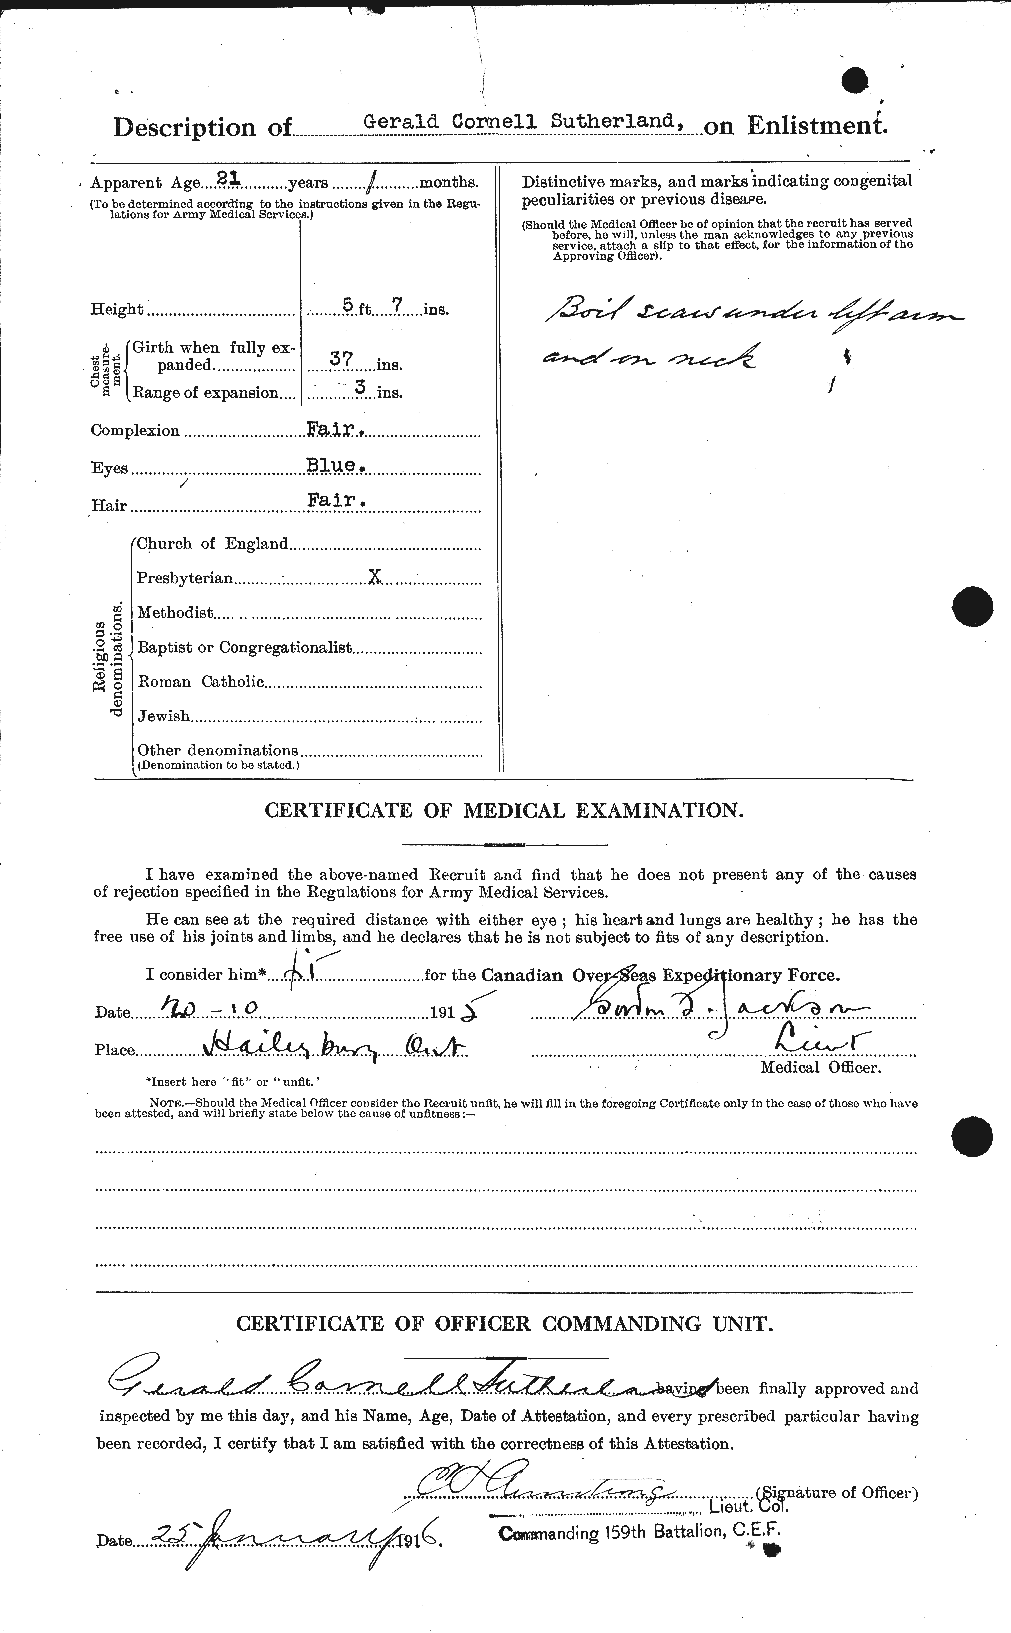 Personnel Records of the First World War - CEF 124837b